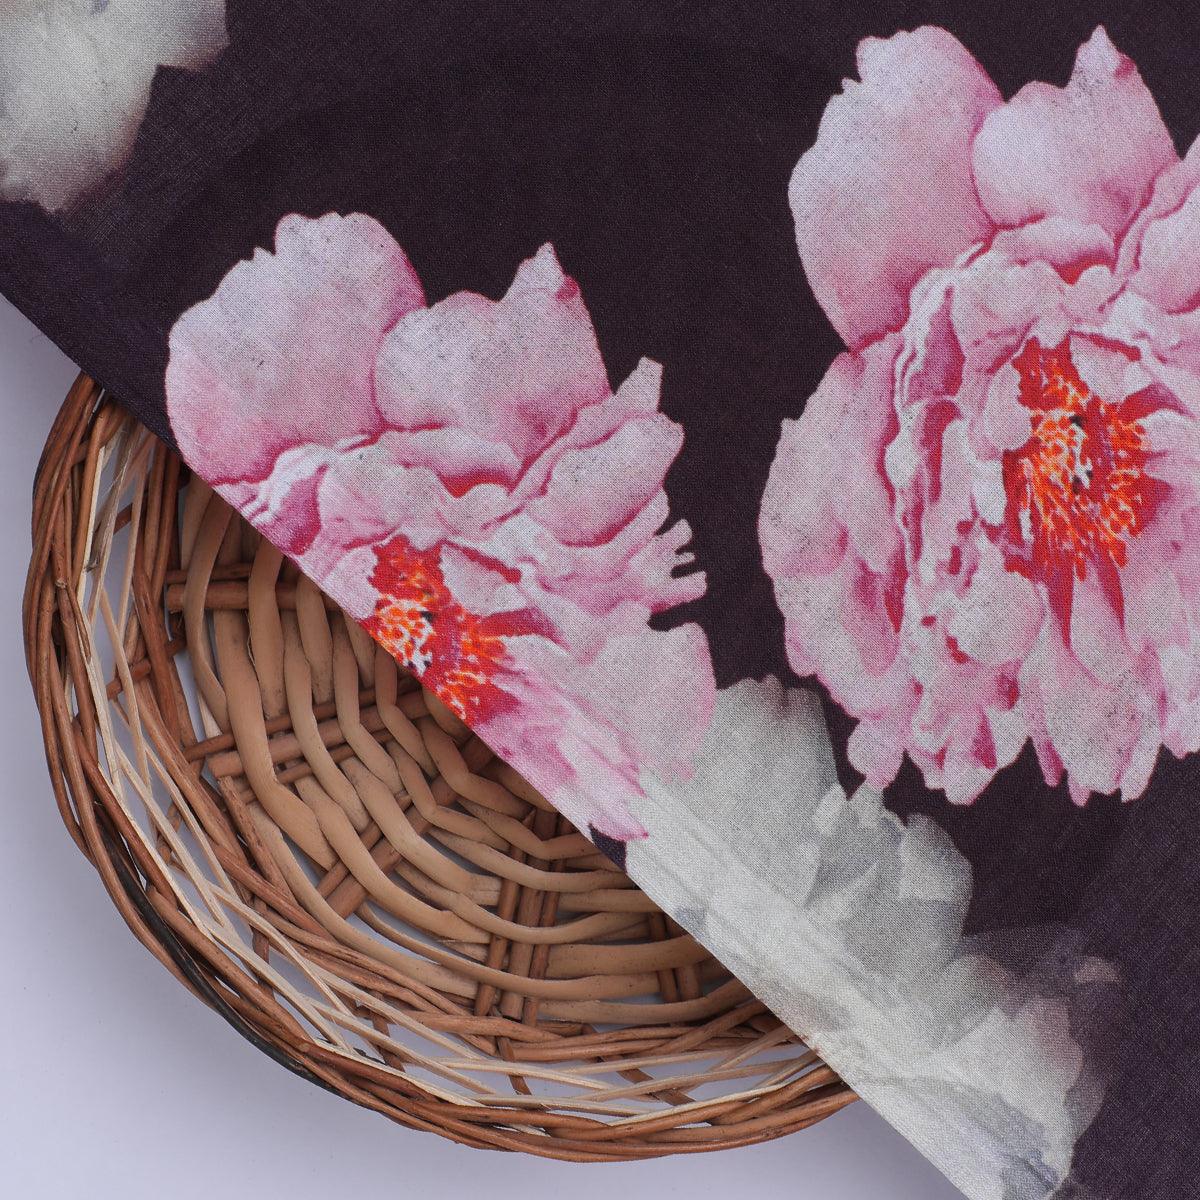 Attractive Pink Roses With Grey Digital Printed Fabric - Cotton - FAB VOGUE Studio®